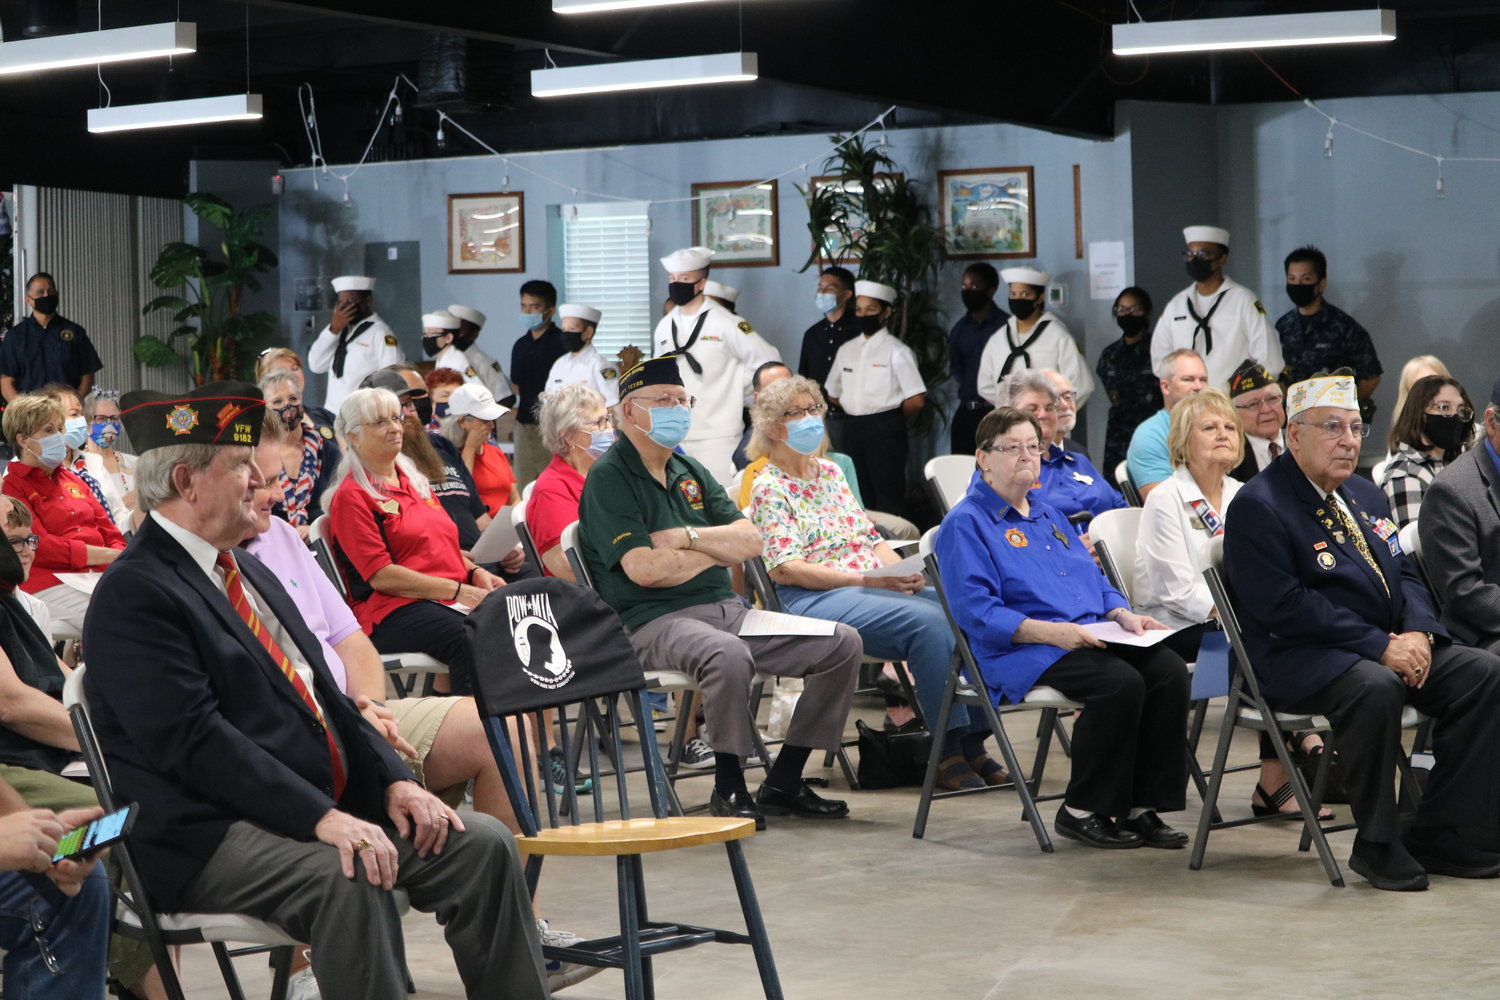 Attendees sit and listen during Saturday's 9/11 event at the Katy VFW.